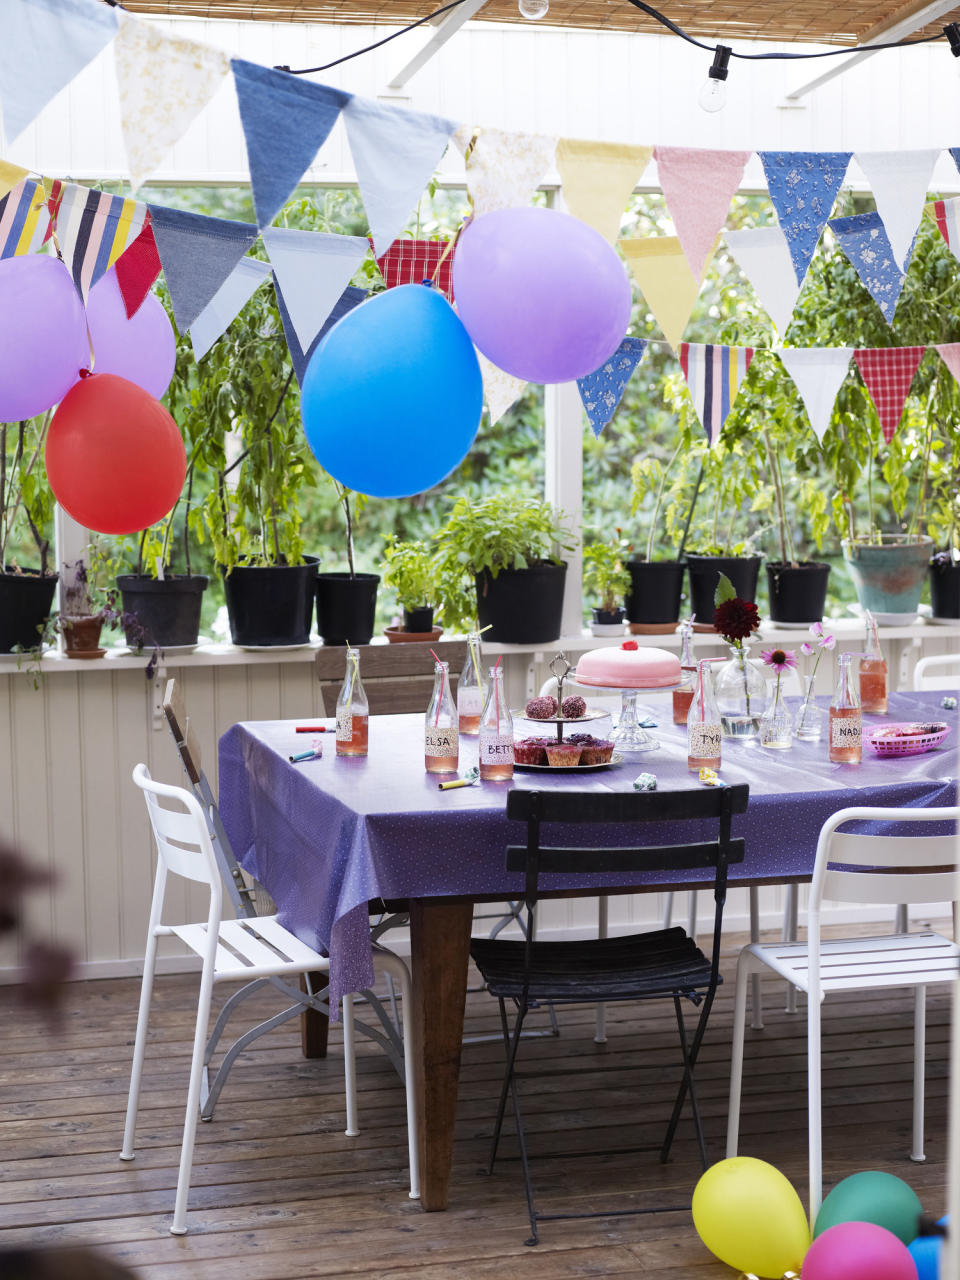 A birthday party set up on an outdoor deck.